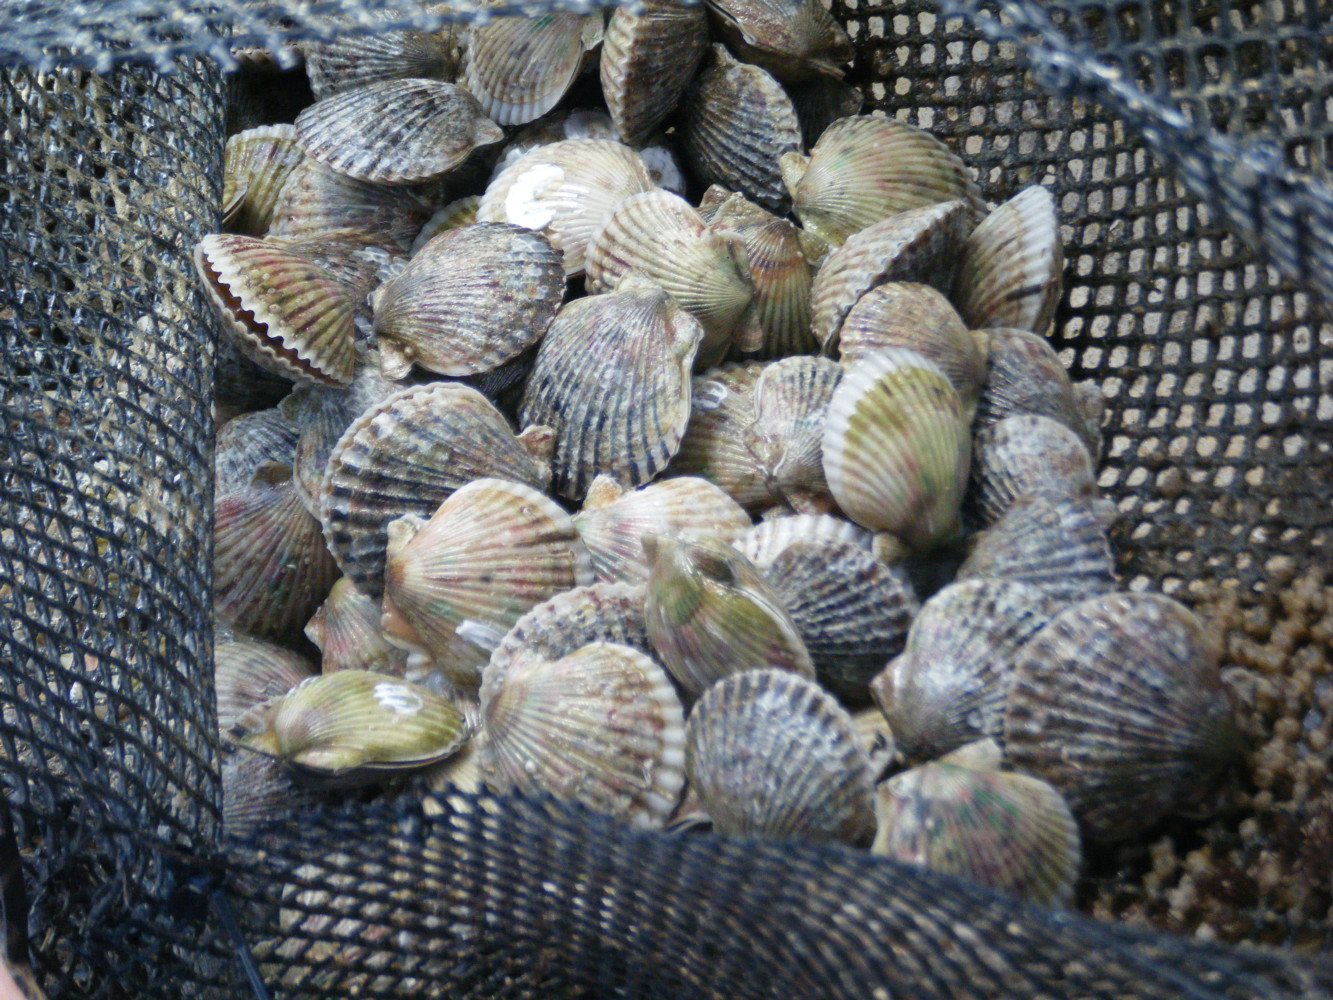 "THE COMMERCIALIZATION OF BAY SCALLOPS IN FLORIDA"

A BAY SHELLFISH PROJECT FUNDED THROUGH ARC

THE PROJECT ANSWERED NECESSARY QUESTIONS TO MOVE THE FLORIDA BAY SCALLOP FROM POTENTIAL TO POSSIBLE

(Argopecten irradians)